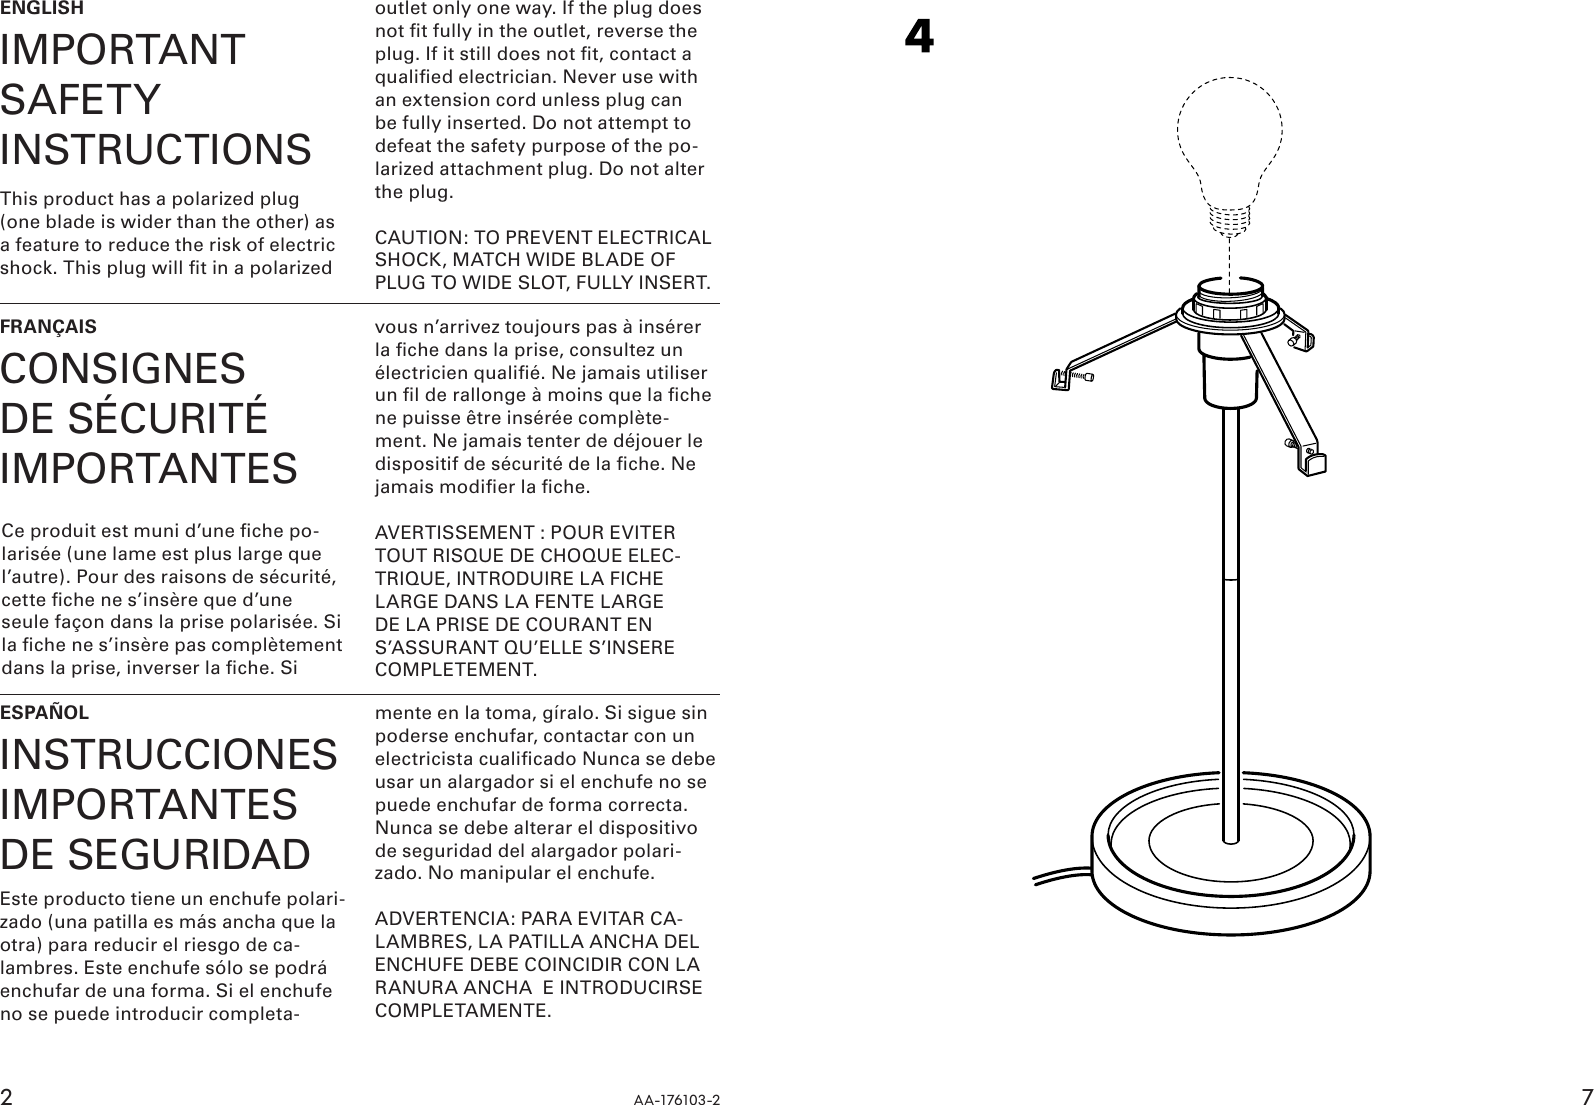 Page 2 of 4 - Ikea Ikea-Basisk-Table-Lamp-21-Assembly-Instruction-5  Ikea-basisk-table-lamp-21-assembly-instruction